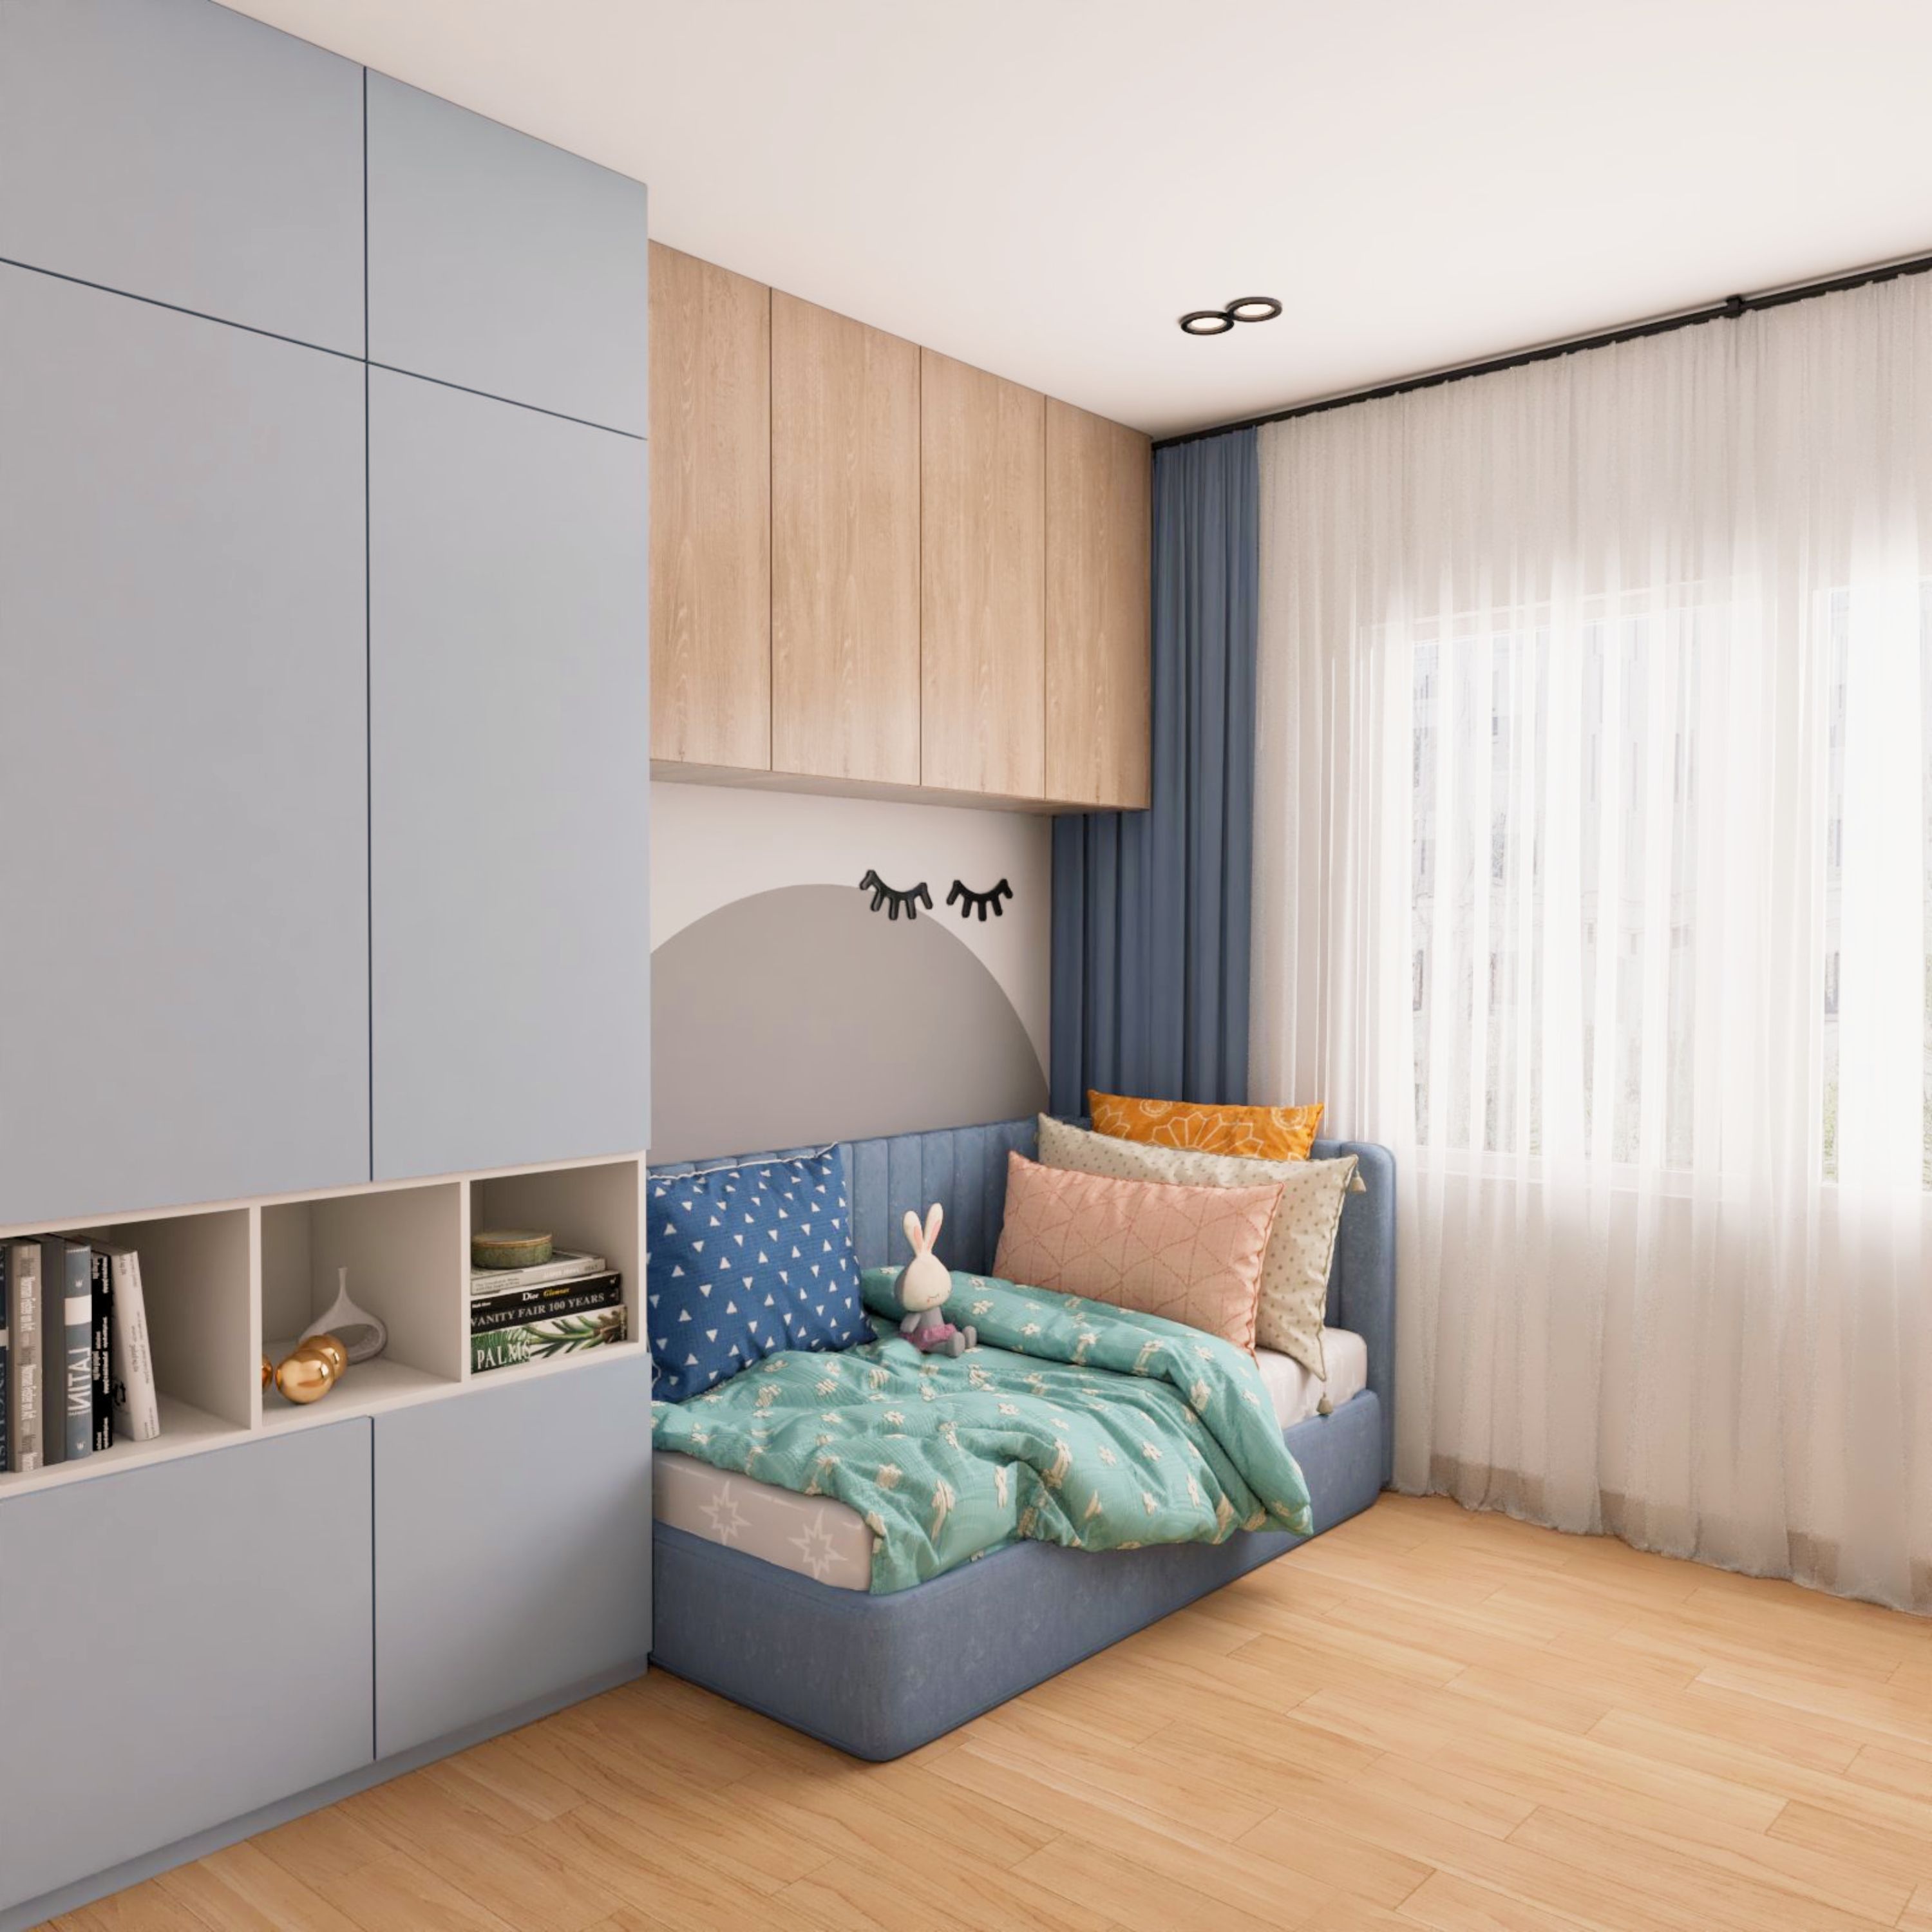 Modern Kids Bedroom Design with Blue Bed-Cum-Sofa And Overhead Wooden Wall Units